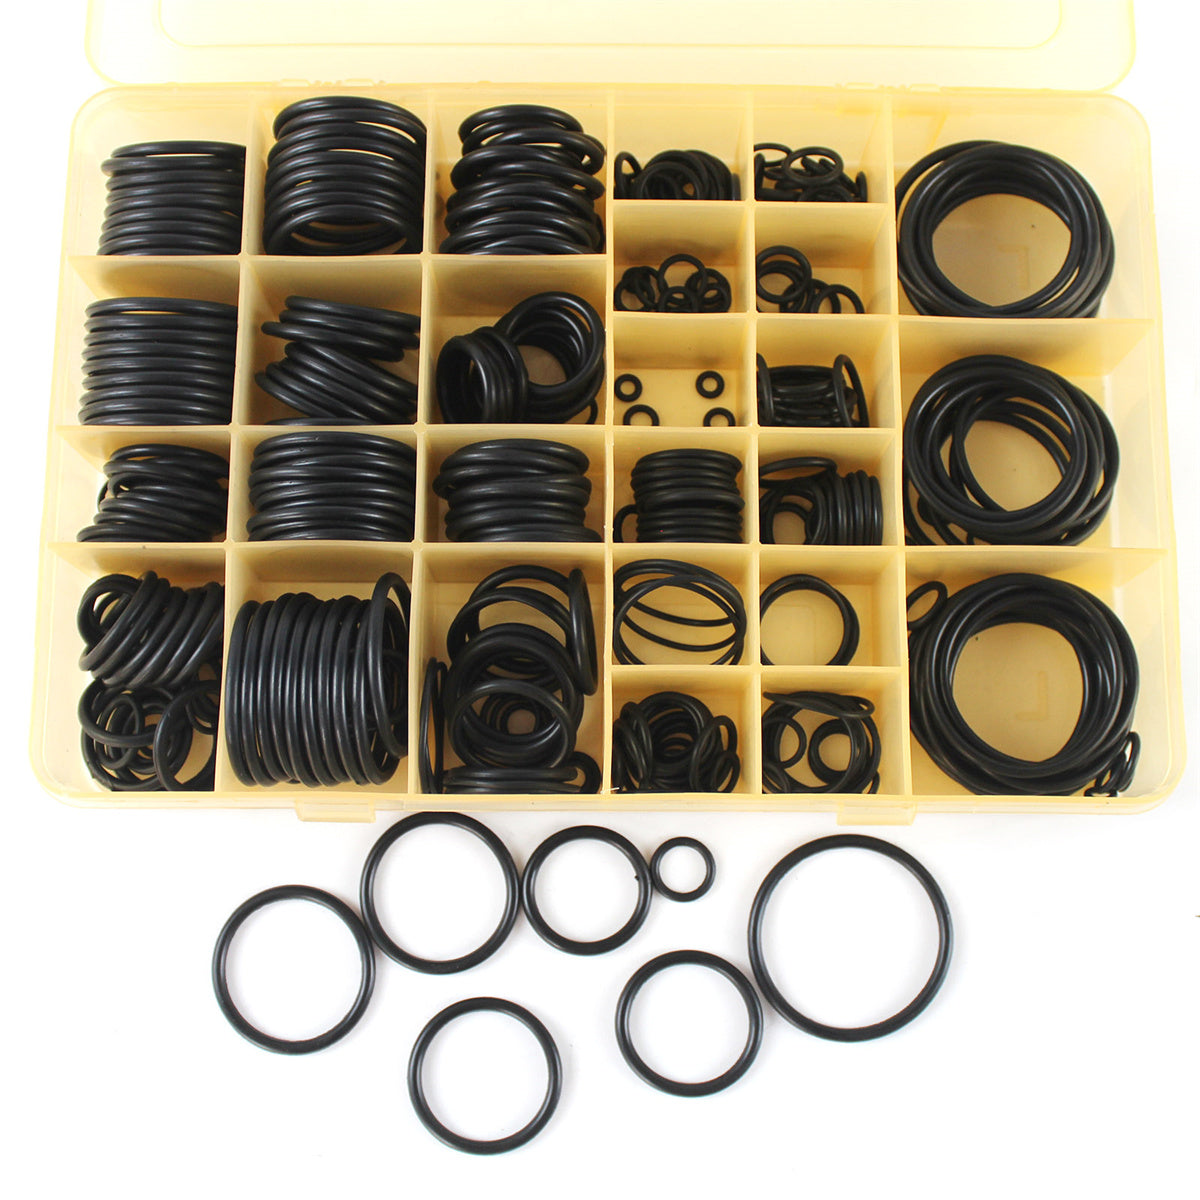 Universal O Ring Kit - For Both Domestic and Imported Cars